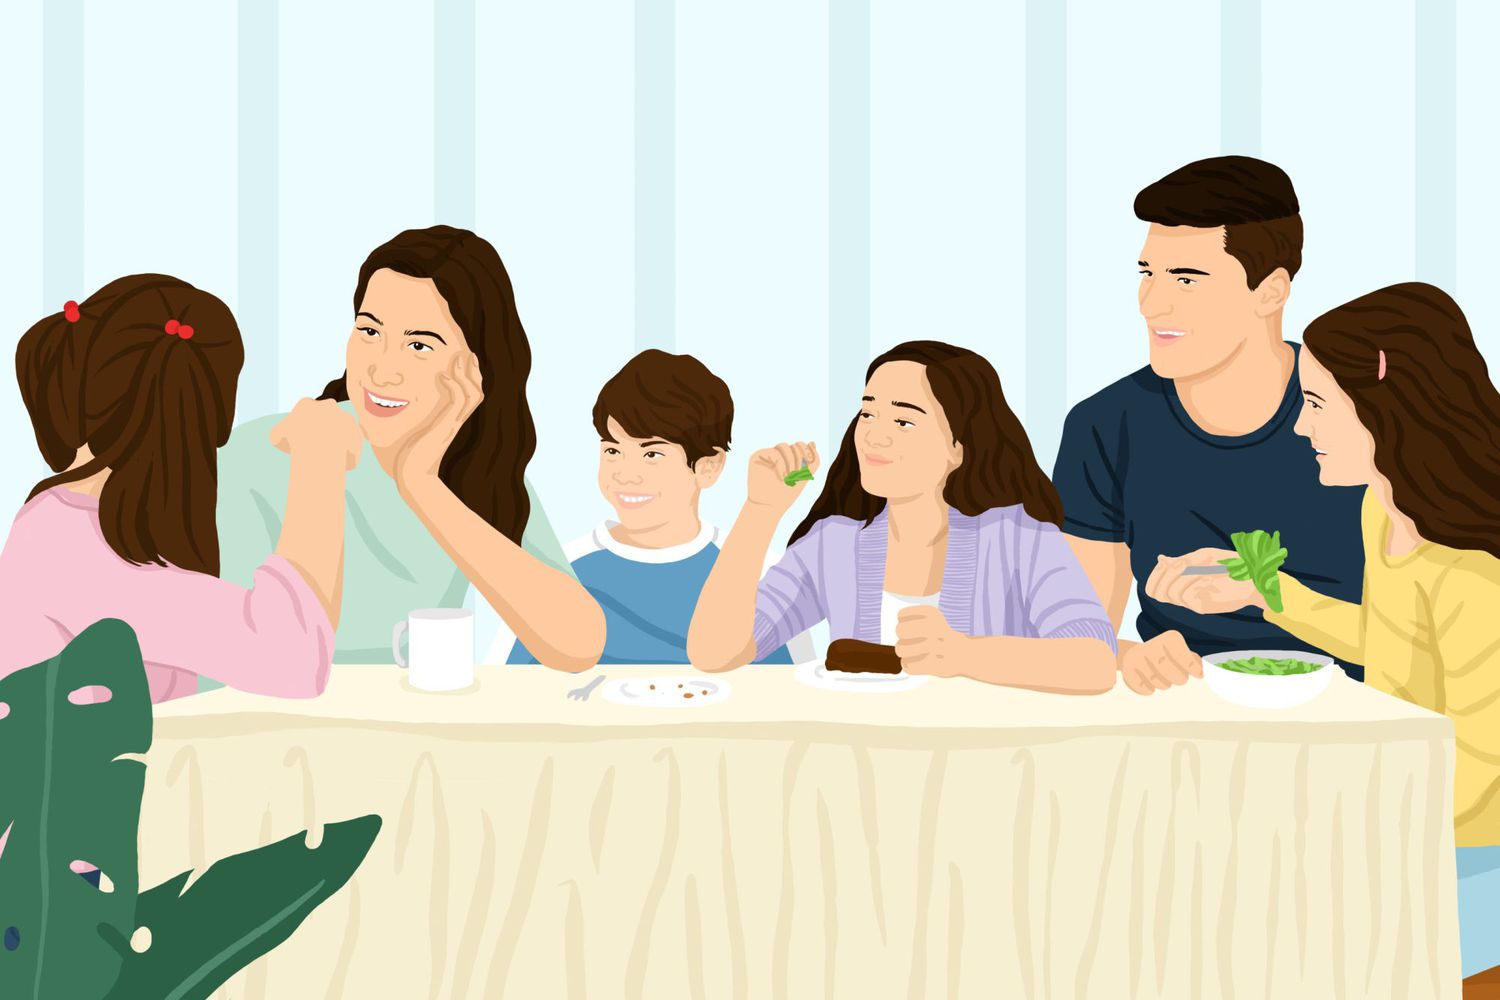 An illustration of a family talking at a dinner table.